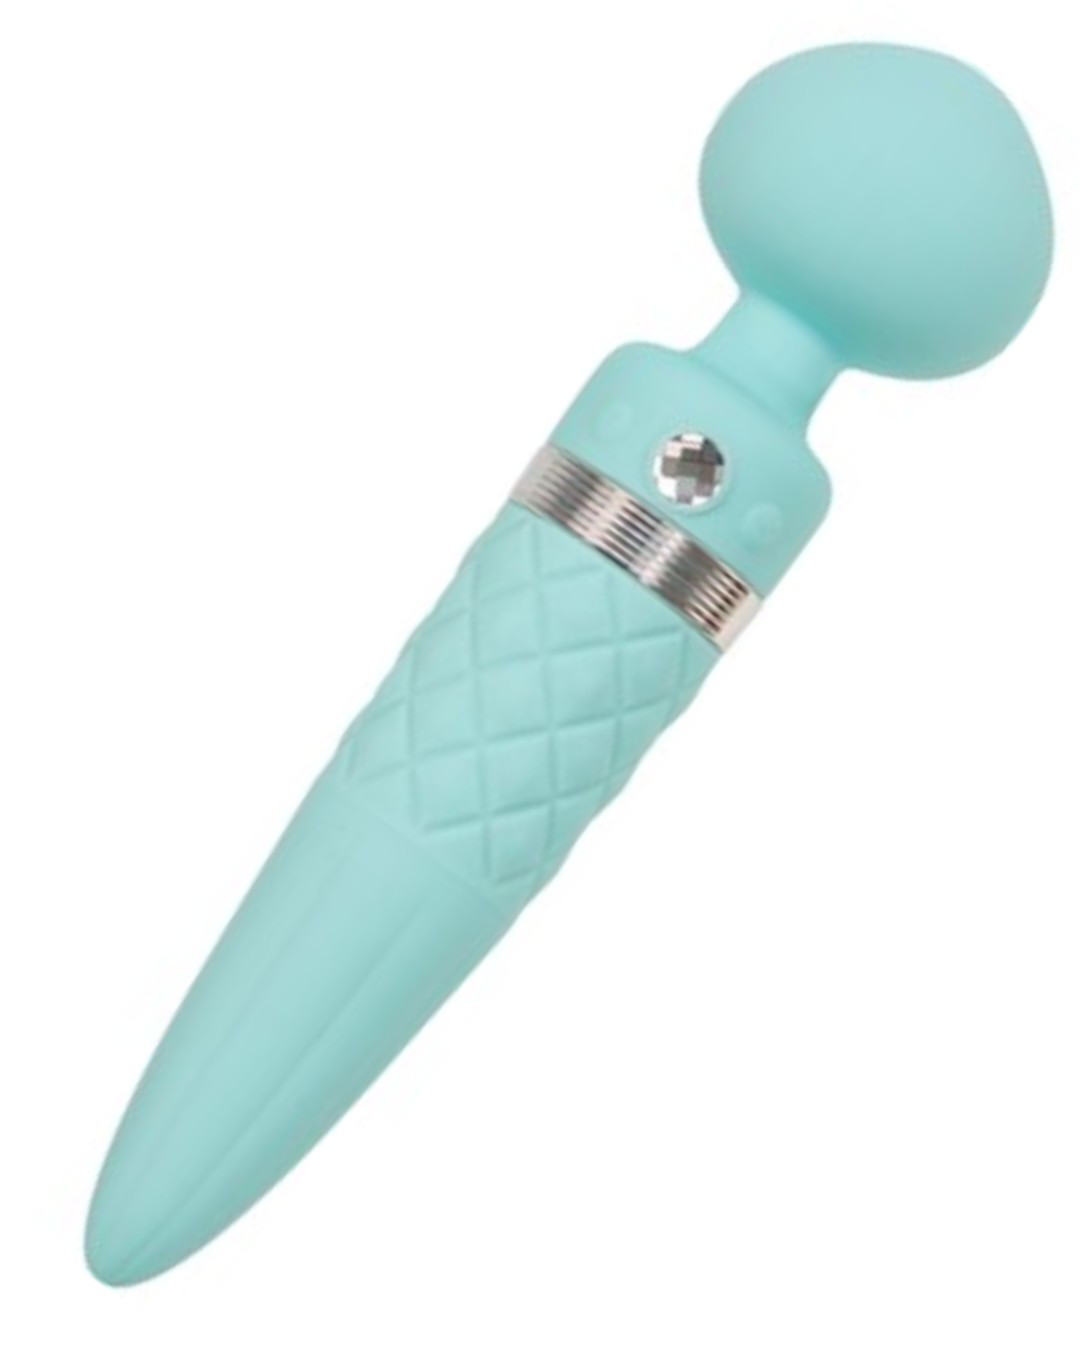 Pillow Talk Sultry Waterproof Double Ended Wand Vibrator - Teal